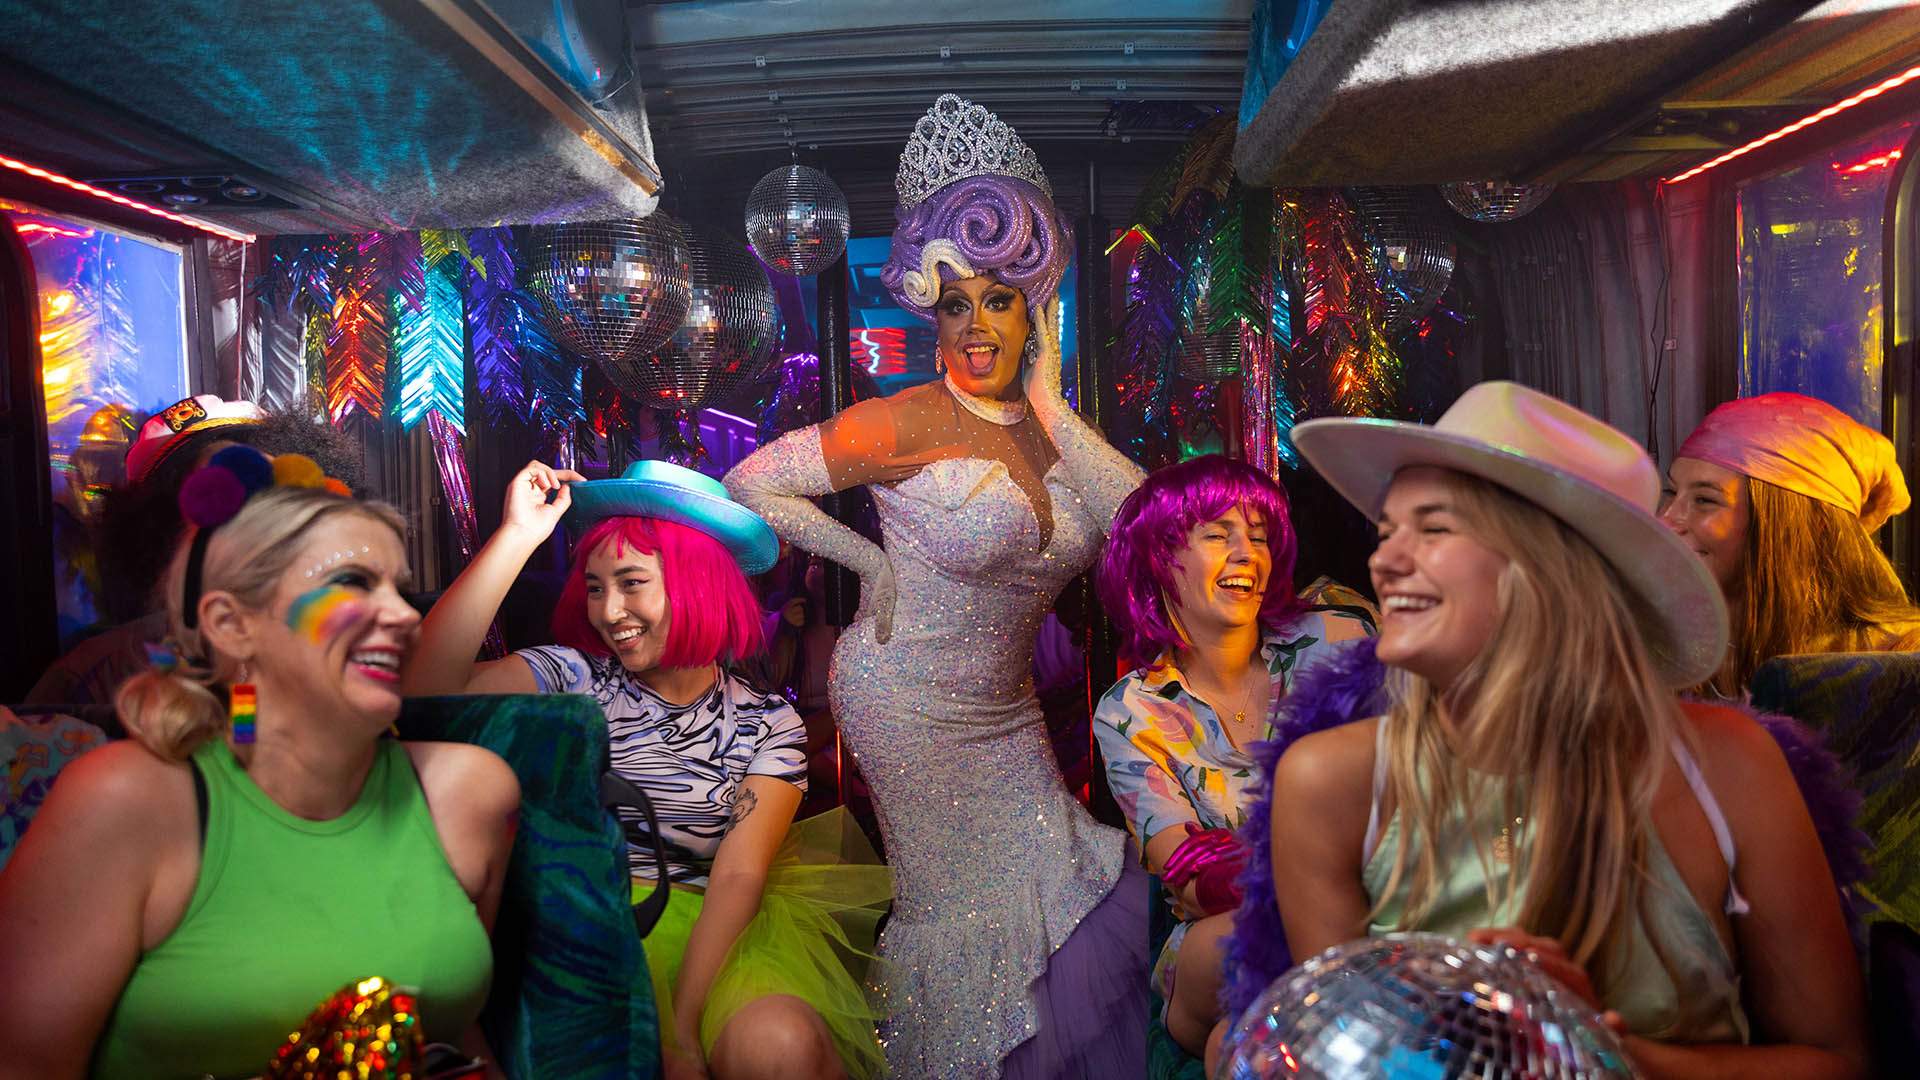 Uber Is Running a Free Hop-On-Hop-Off Party Bus for WorldPride Hosted by Vengaboys and Drag Queen Stars